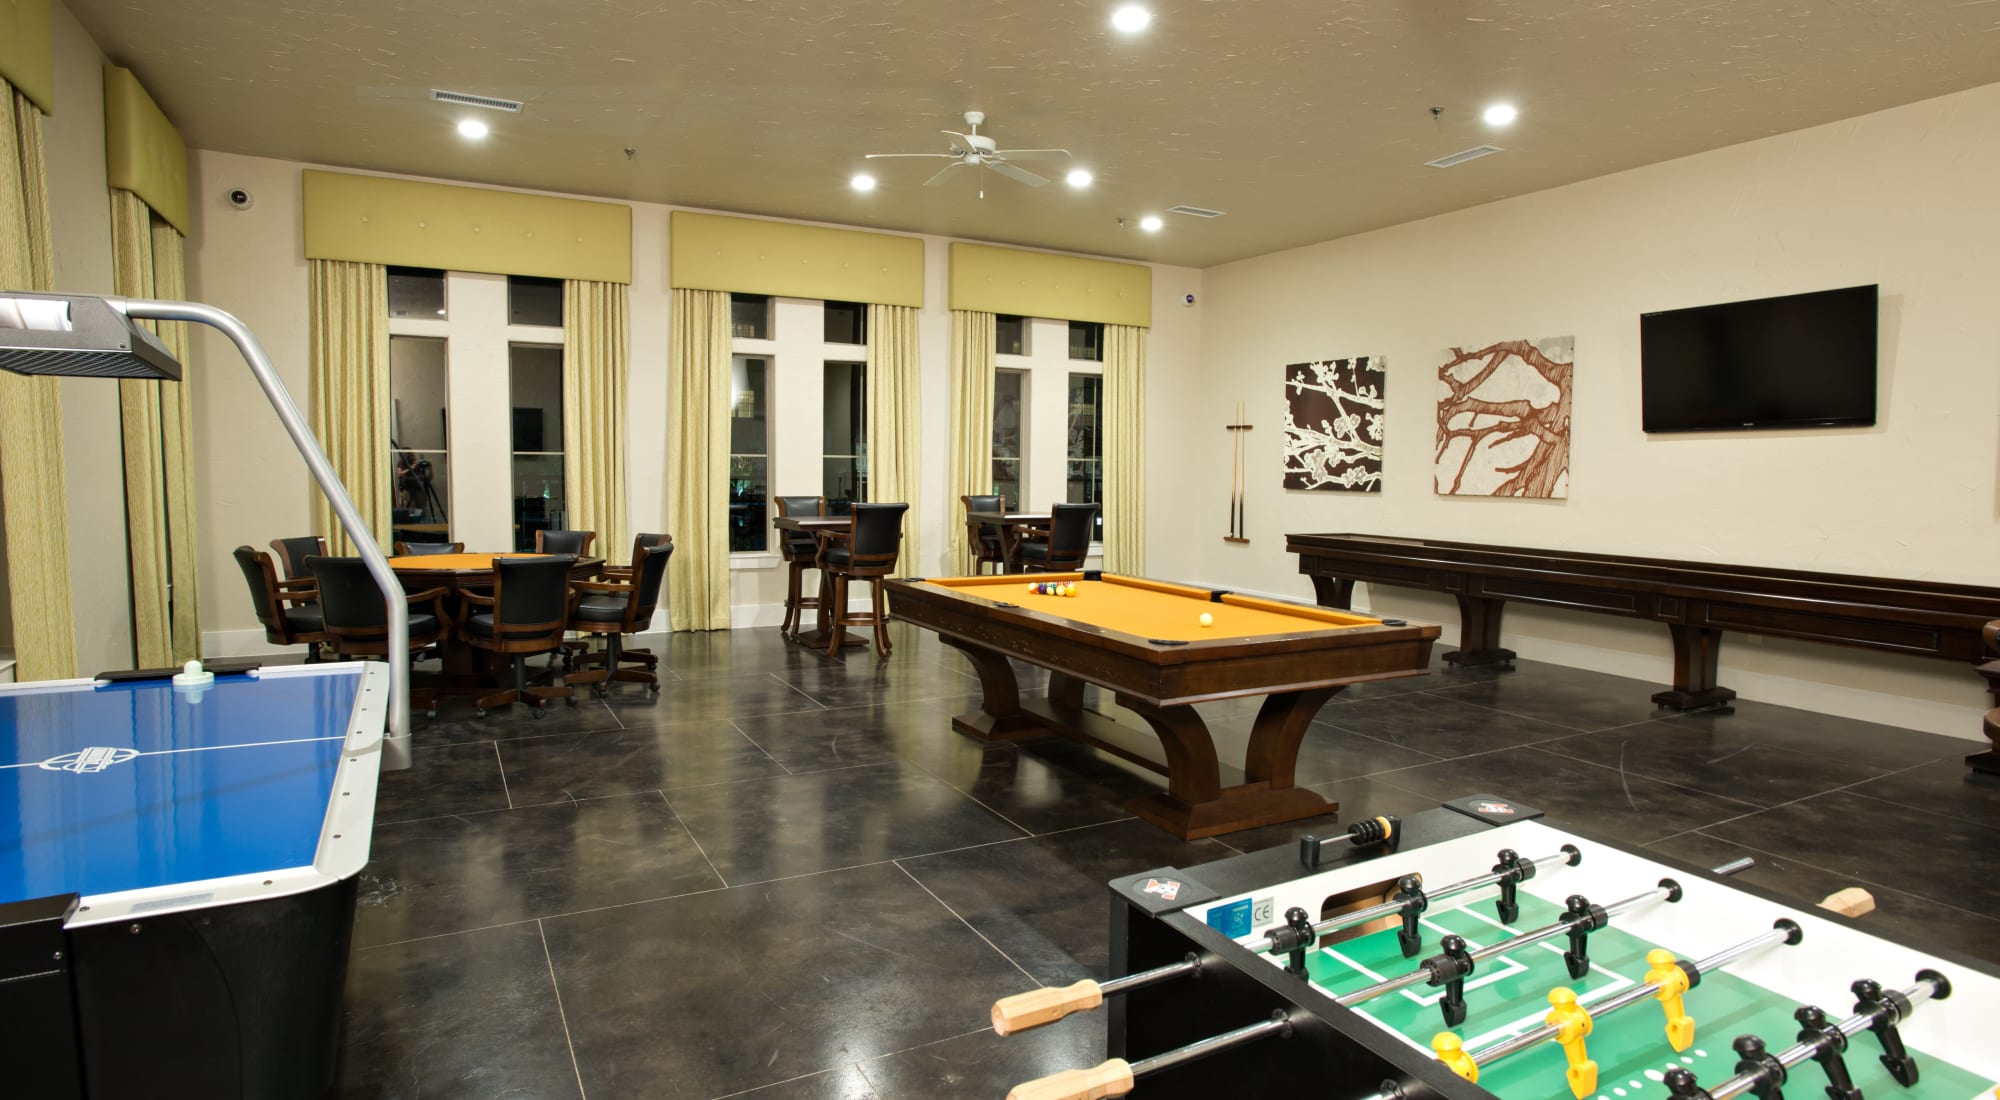 Game Room with Pool Table at Villas in Westover Hills